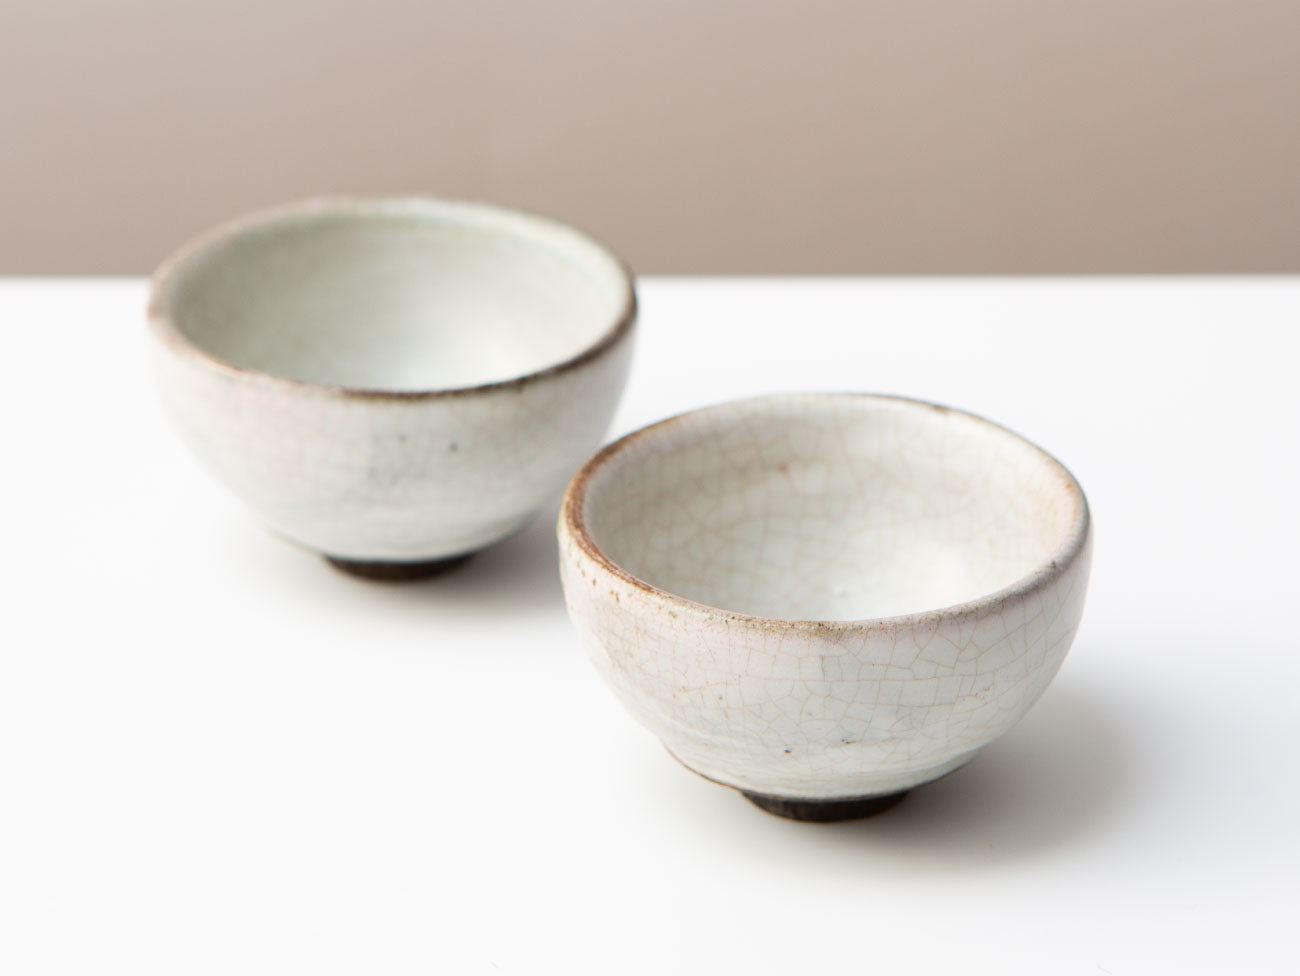 A Pair of Snow Cups, 5 day wood-fired. Liao Guo Hua.